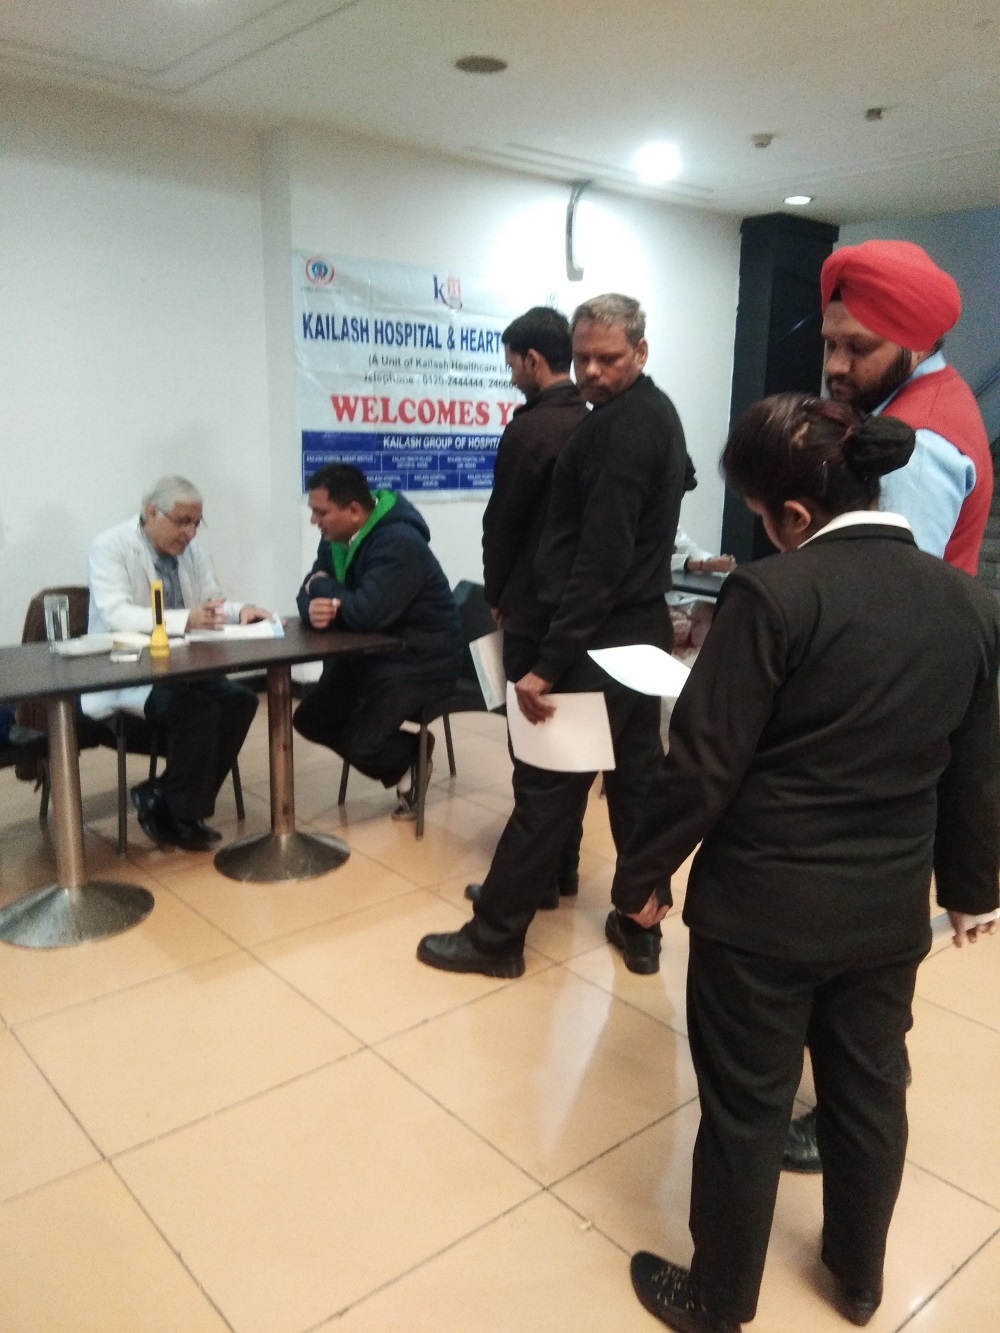 Kailash Charitable Trust in Association With ICICI Prudential is Organized a Free Health Check-up Camp at Wave Mall Sector 18, Noida